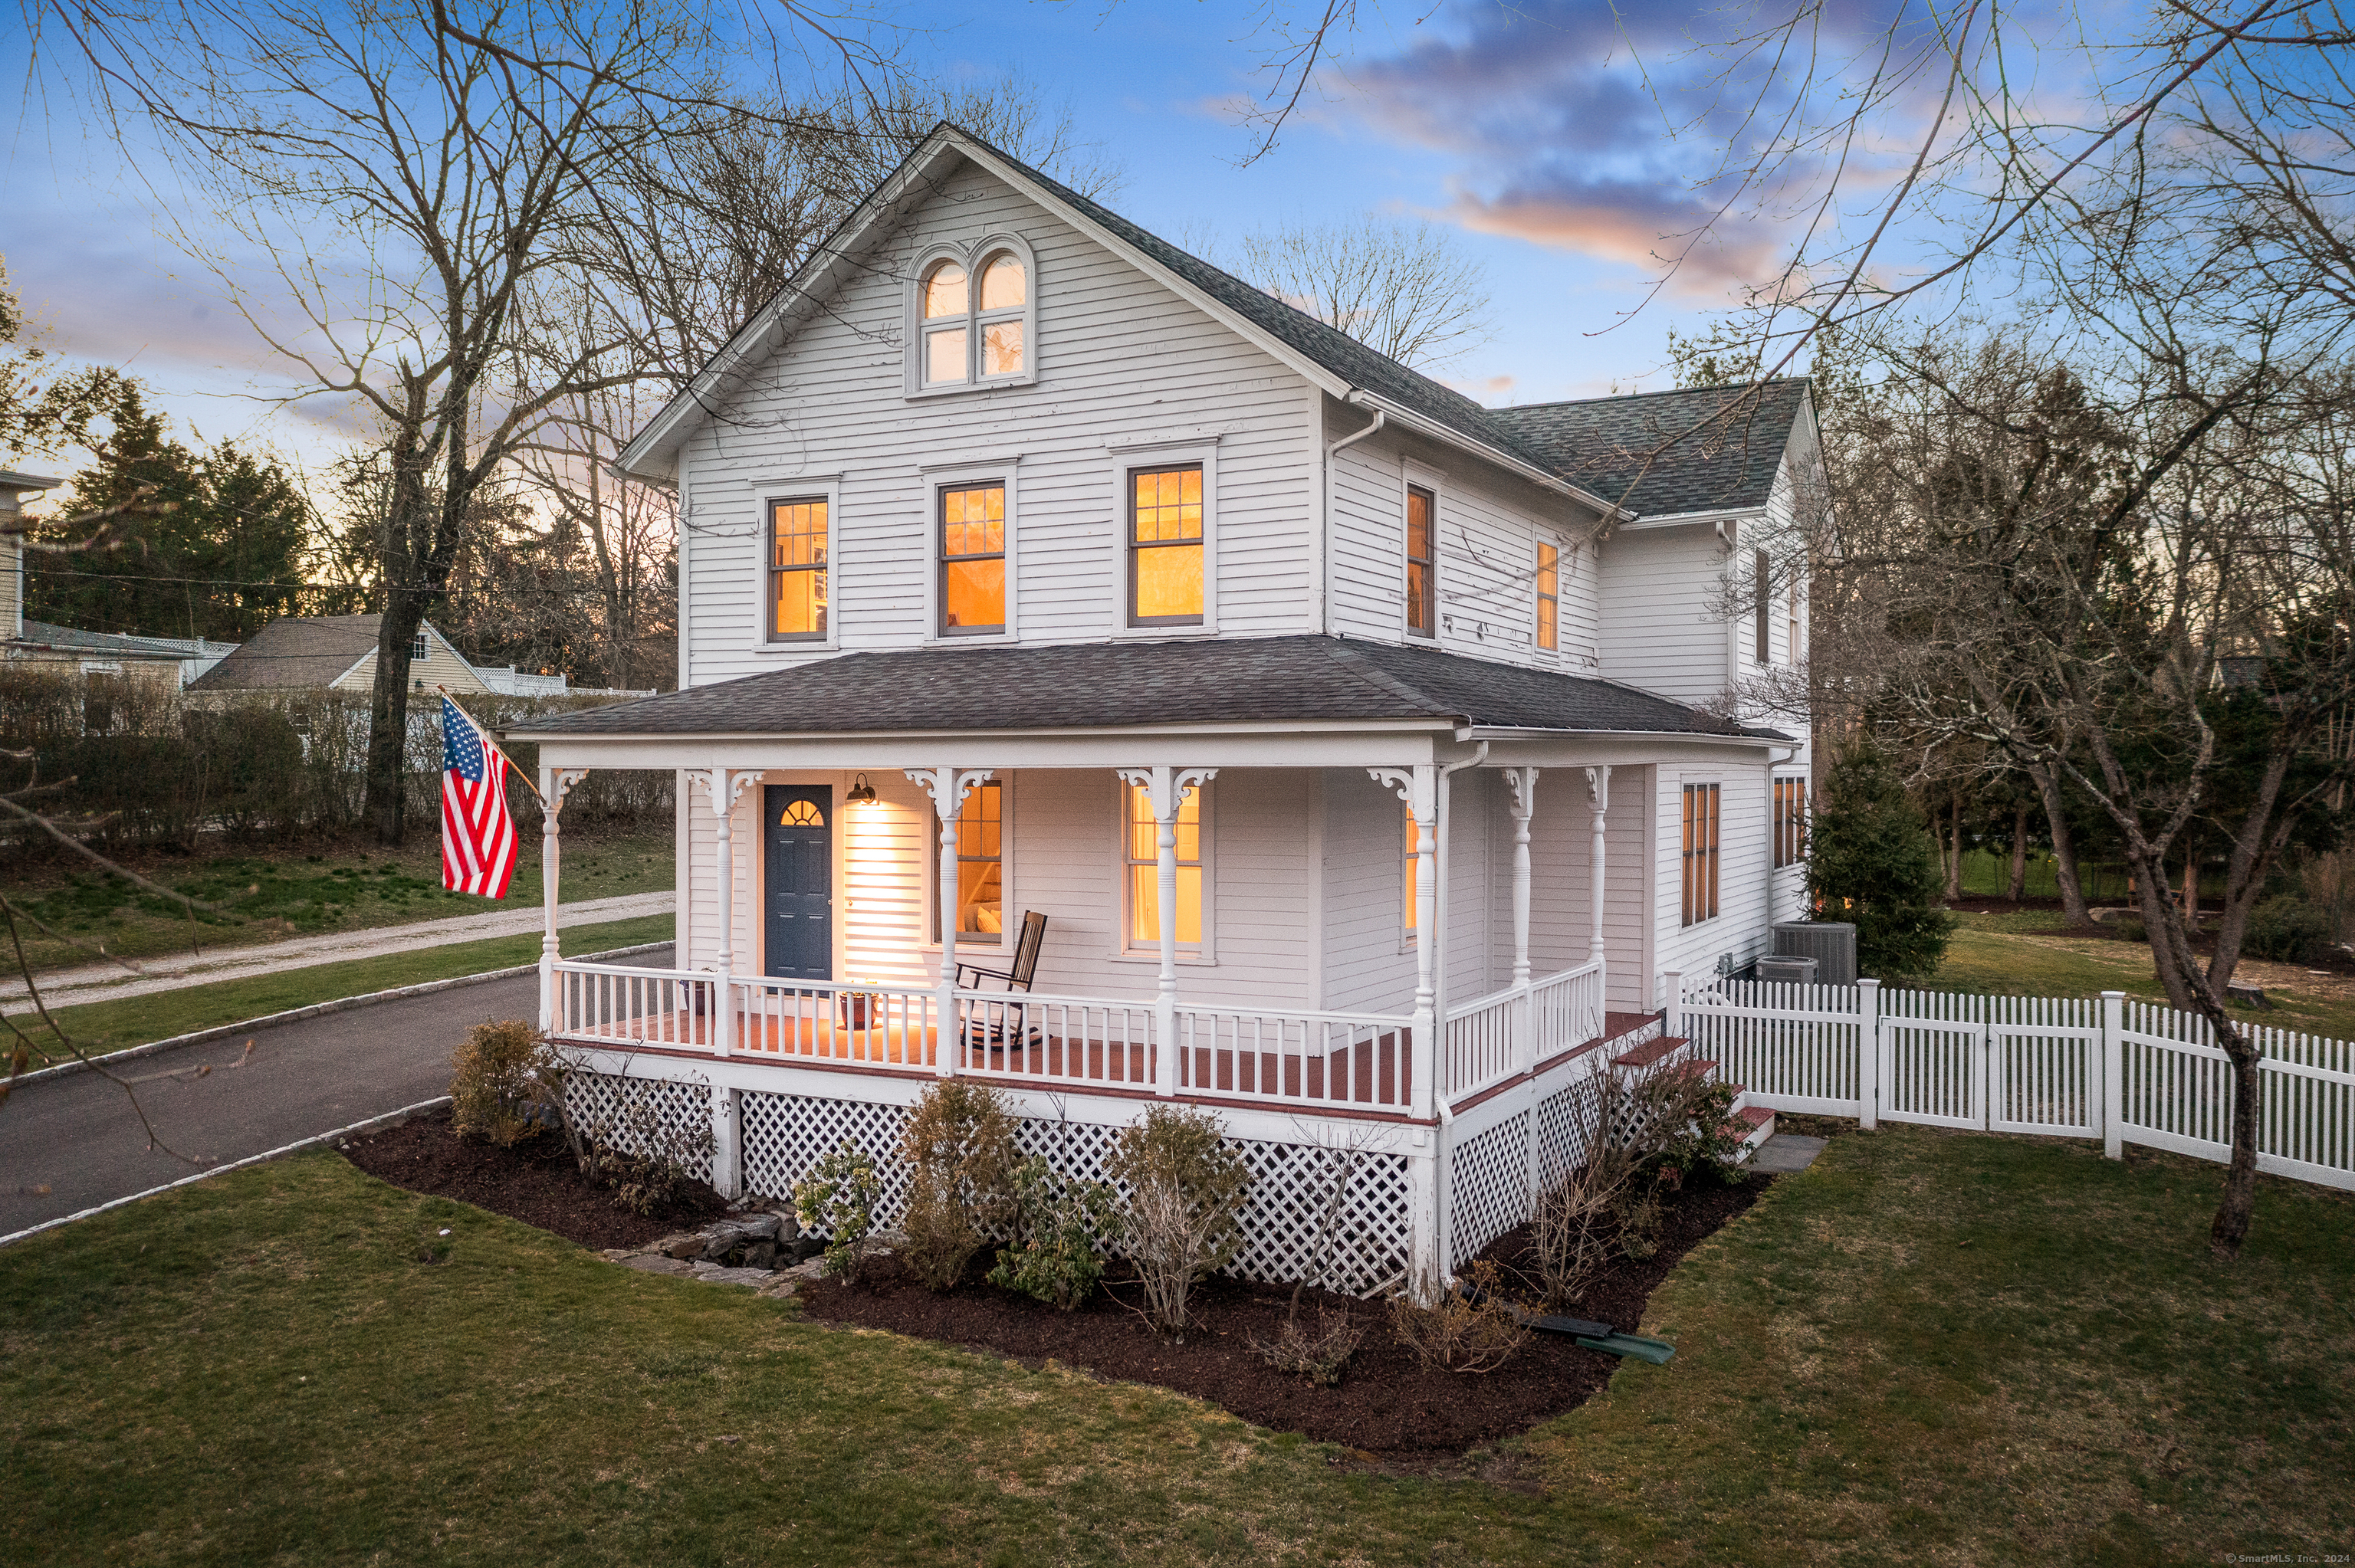 Set in the heart of Westport's Saugatuck Village, this updated and expanded 1890s farmhouse combines charm with an unbeatable location, just moments from riverfront cafes, restaurants, and the MetroNorth train to NYC. The wrap-around porch welcomes you to a sunny living room that seamlessly flows into a family room with hardwood floors throughout. The eat-in kitchen boasts a gas range, granite island, extra pantry storage, and picturesque backyard views.The main floor also includes a half bath, plus office with custom desks and built-ins, perfect for work or study. The mudroom provides easy access to the sunny deck, ideal for grilling, dining, or lounging. Upstairs, the luxury primary suite has a walk-in closet, plus ensuite bathroom with double sinks, a soaking tub, and luxurious walk-in shower. Two additional bedrooms and a hall bath complete this floor. The finished third floor provides versatility with space for overnight guests, a study, or working out. Outside, the flat yard is framed by a tranquil brook and bridge with seating area, plus plenty of grassy lawn for play. The detached 1-car garage and fully fenced yard offer both convenience and privacy. Westport's award-winning schools are nearby, and Compo Beach and downtown shops are just a short ride away, as well as access to 95 and the Merritt Parkway. **OFFERS DUE 4/8/24 by 3pm**